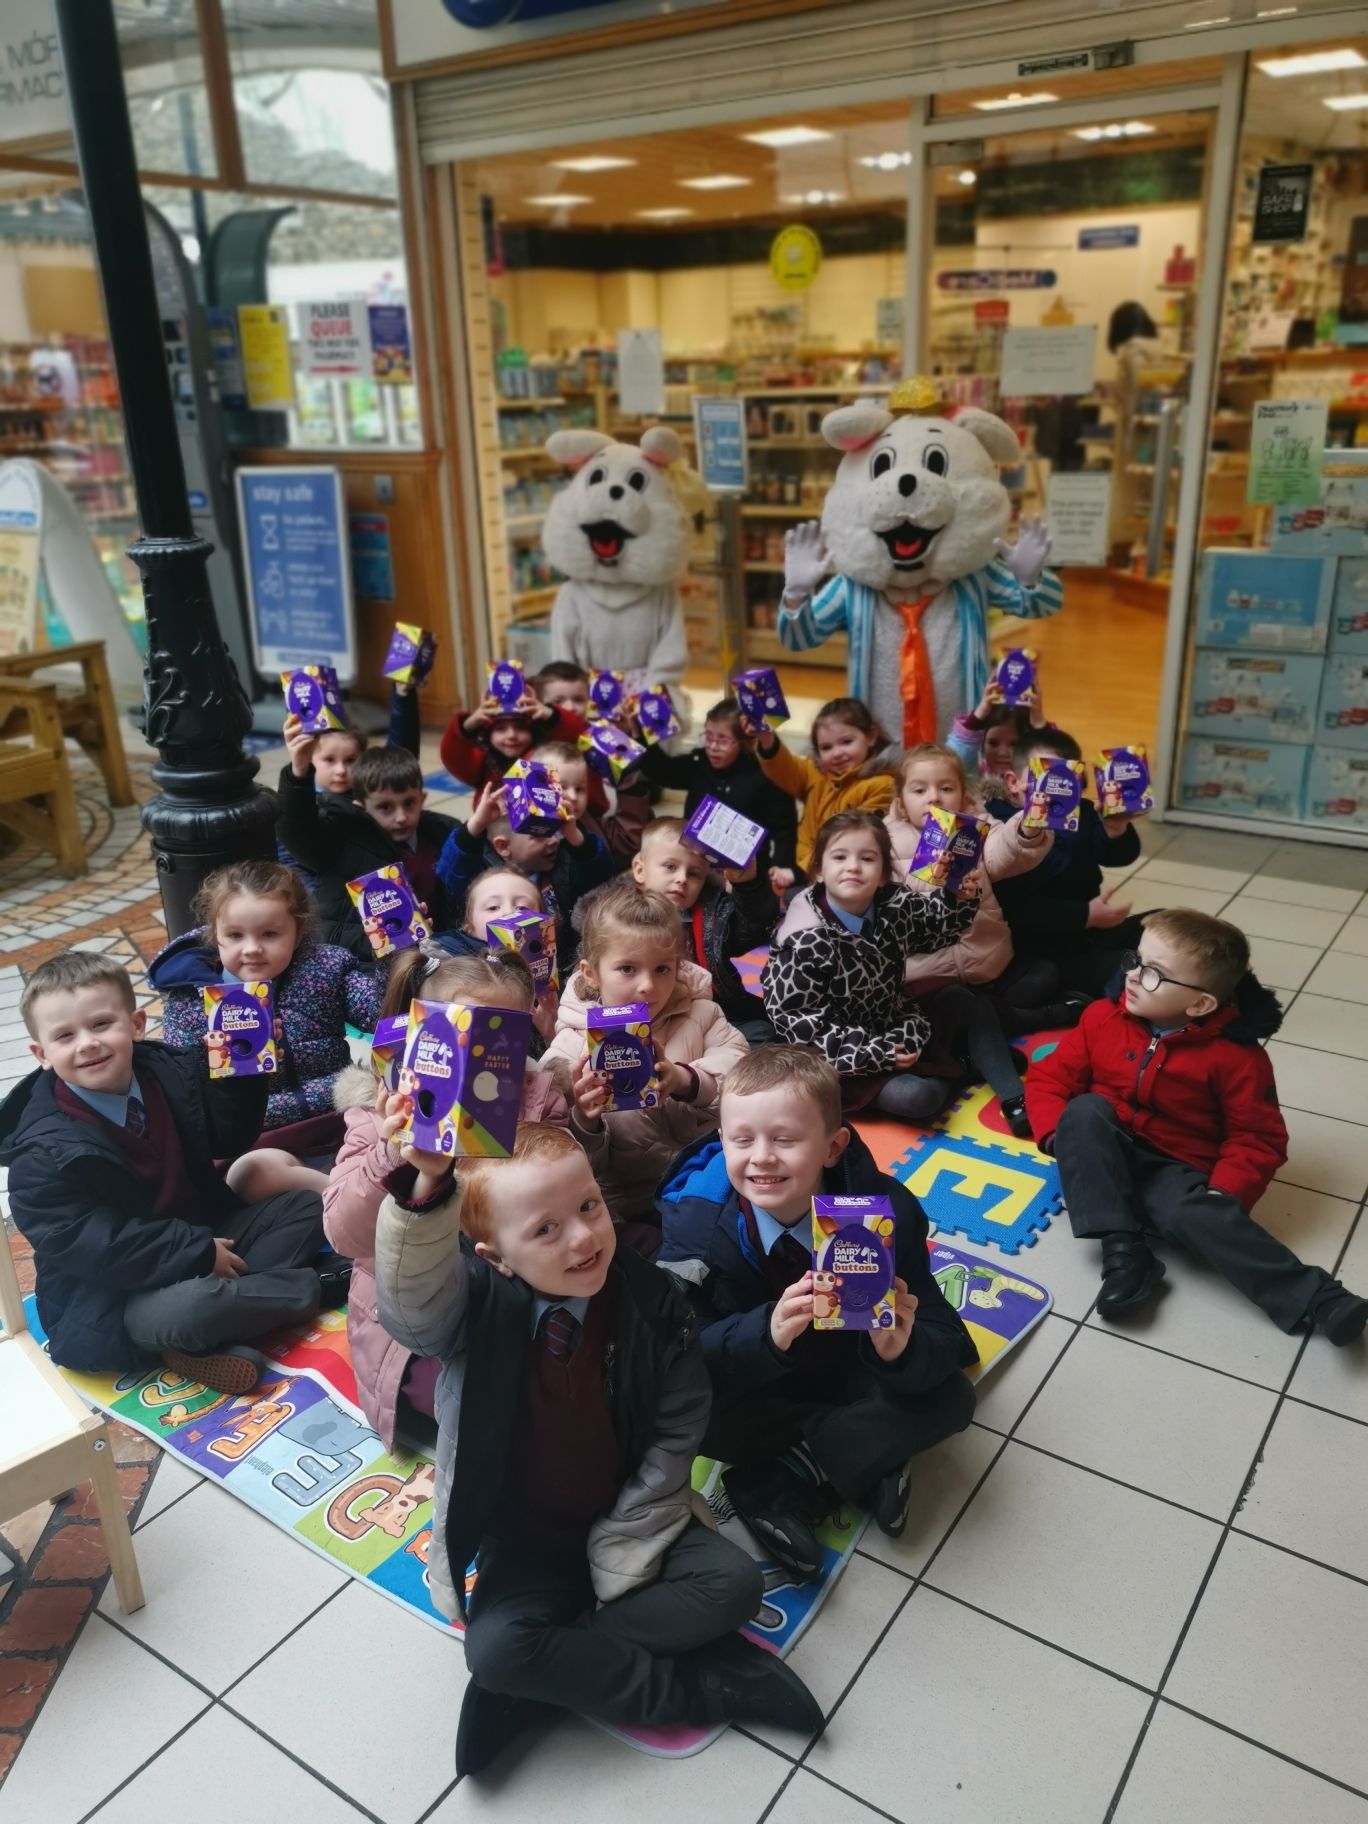 Year 1 meets the Easter Bunny